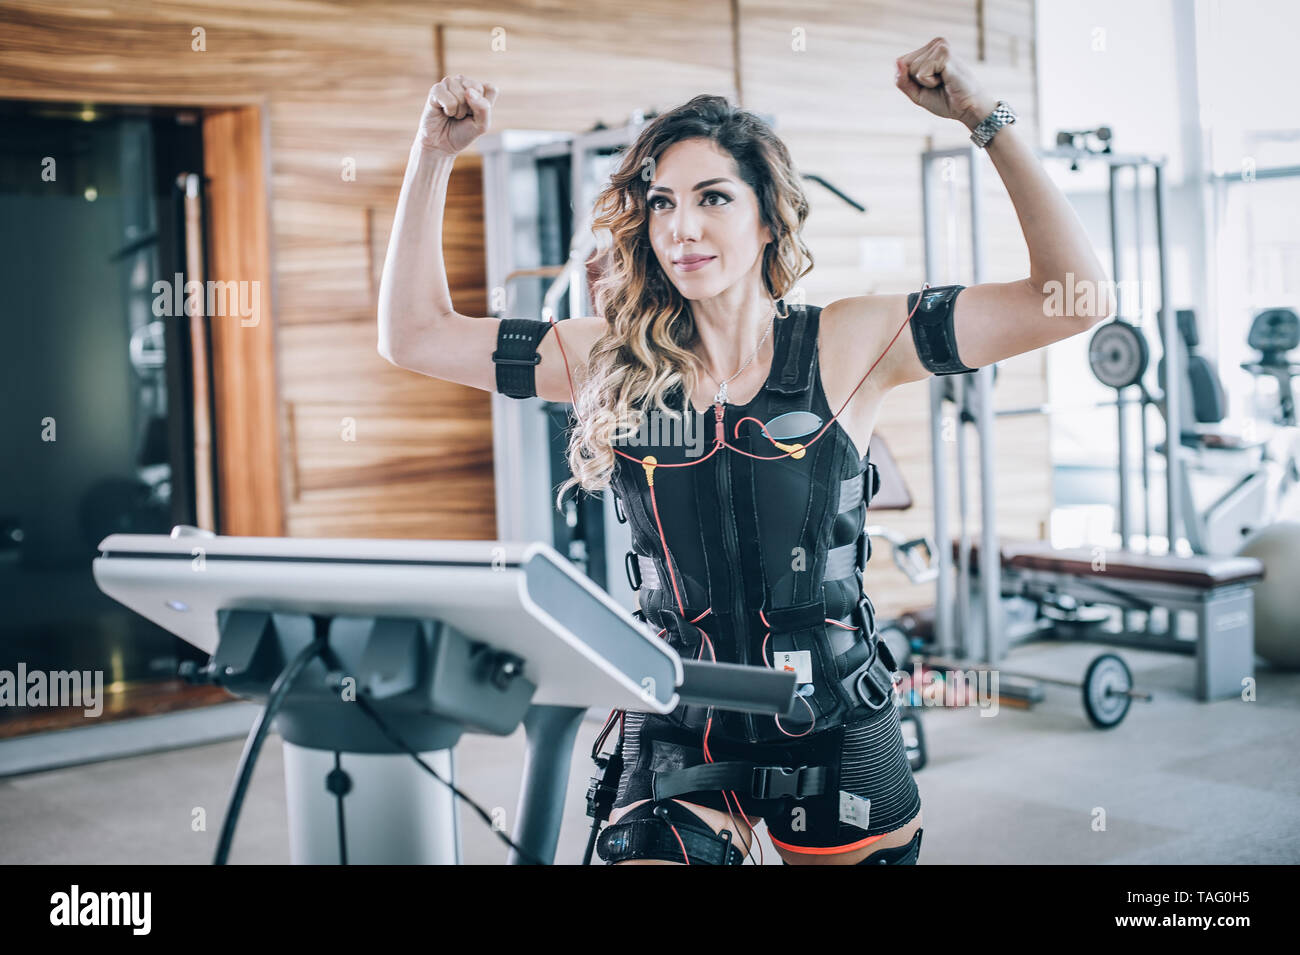 https://c8.alamy.com/comp/TAG0H5/ems-electro-stimulation-women-exercises-with-coach-in-modern-gym-electric-muscle-stimulation-workout-TAG0H5.jpg